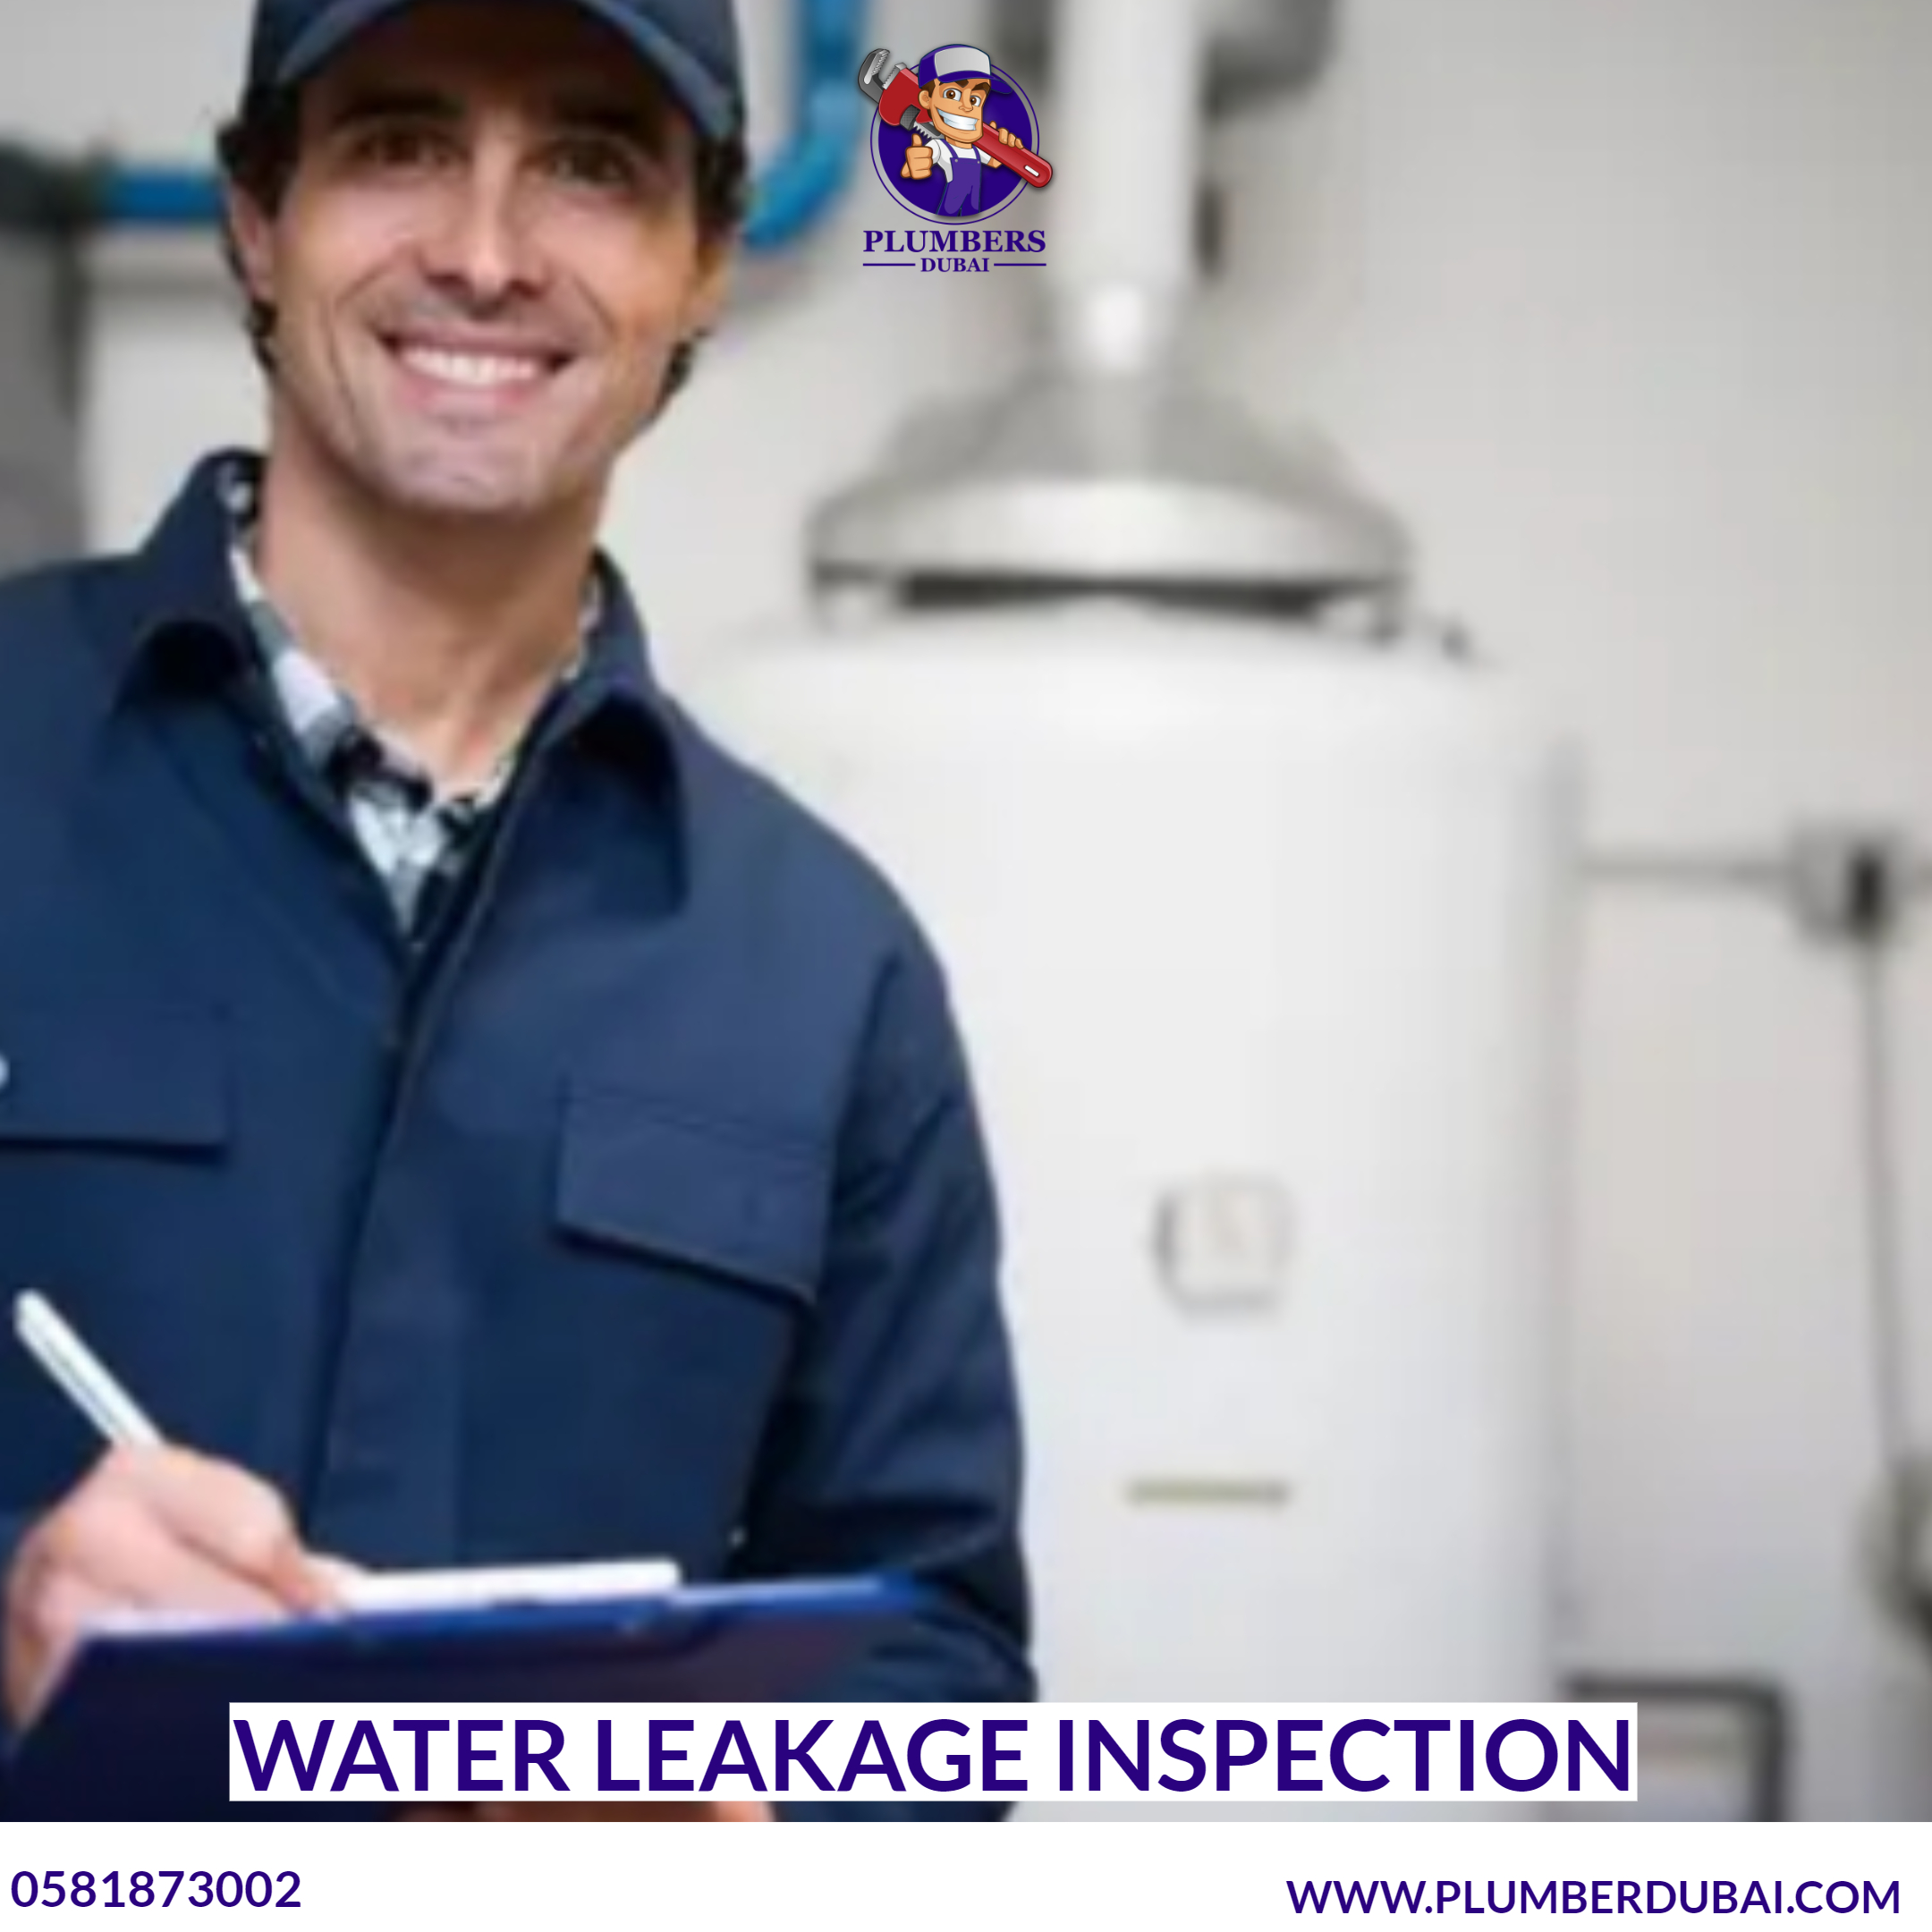 Water leakage inspection